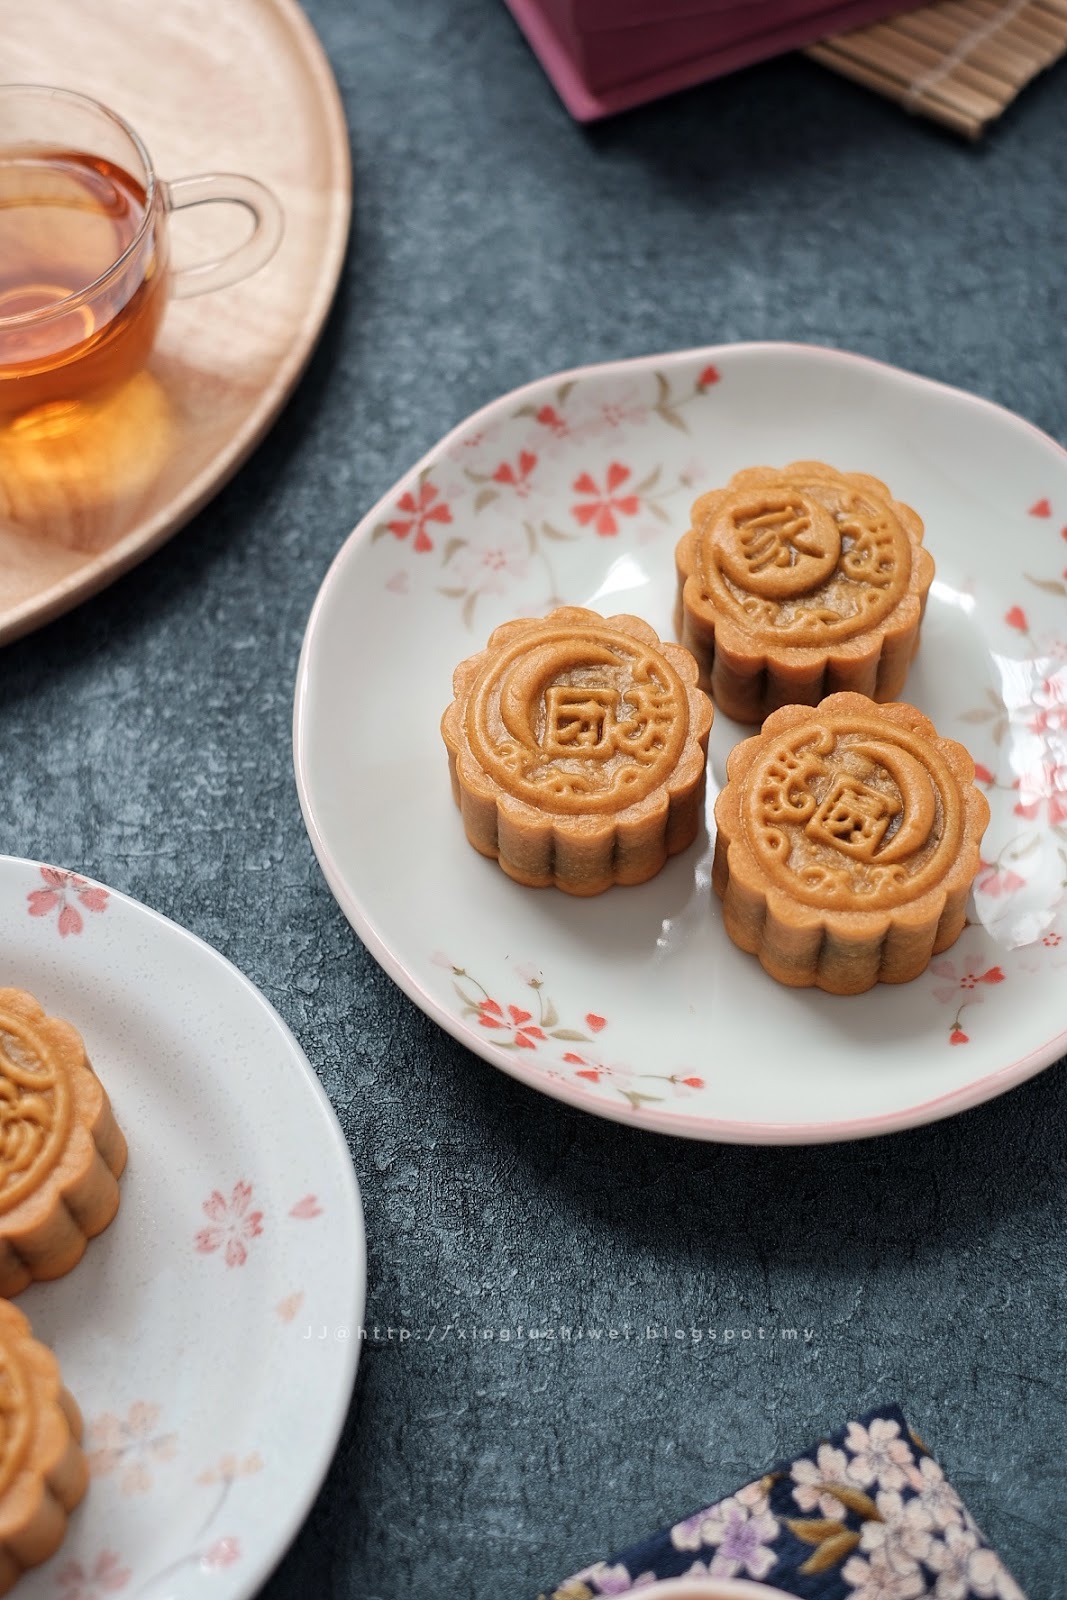 Black Sesame Lotus Mooncake Paste Penang, Malaysia, Butterworth Supplier, Suppliers, Supply ...